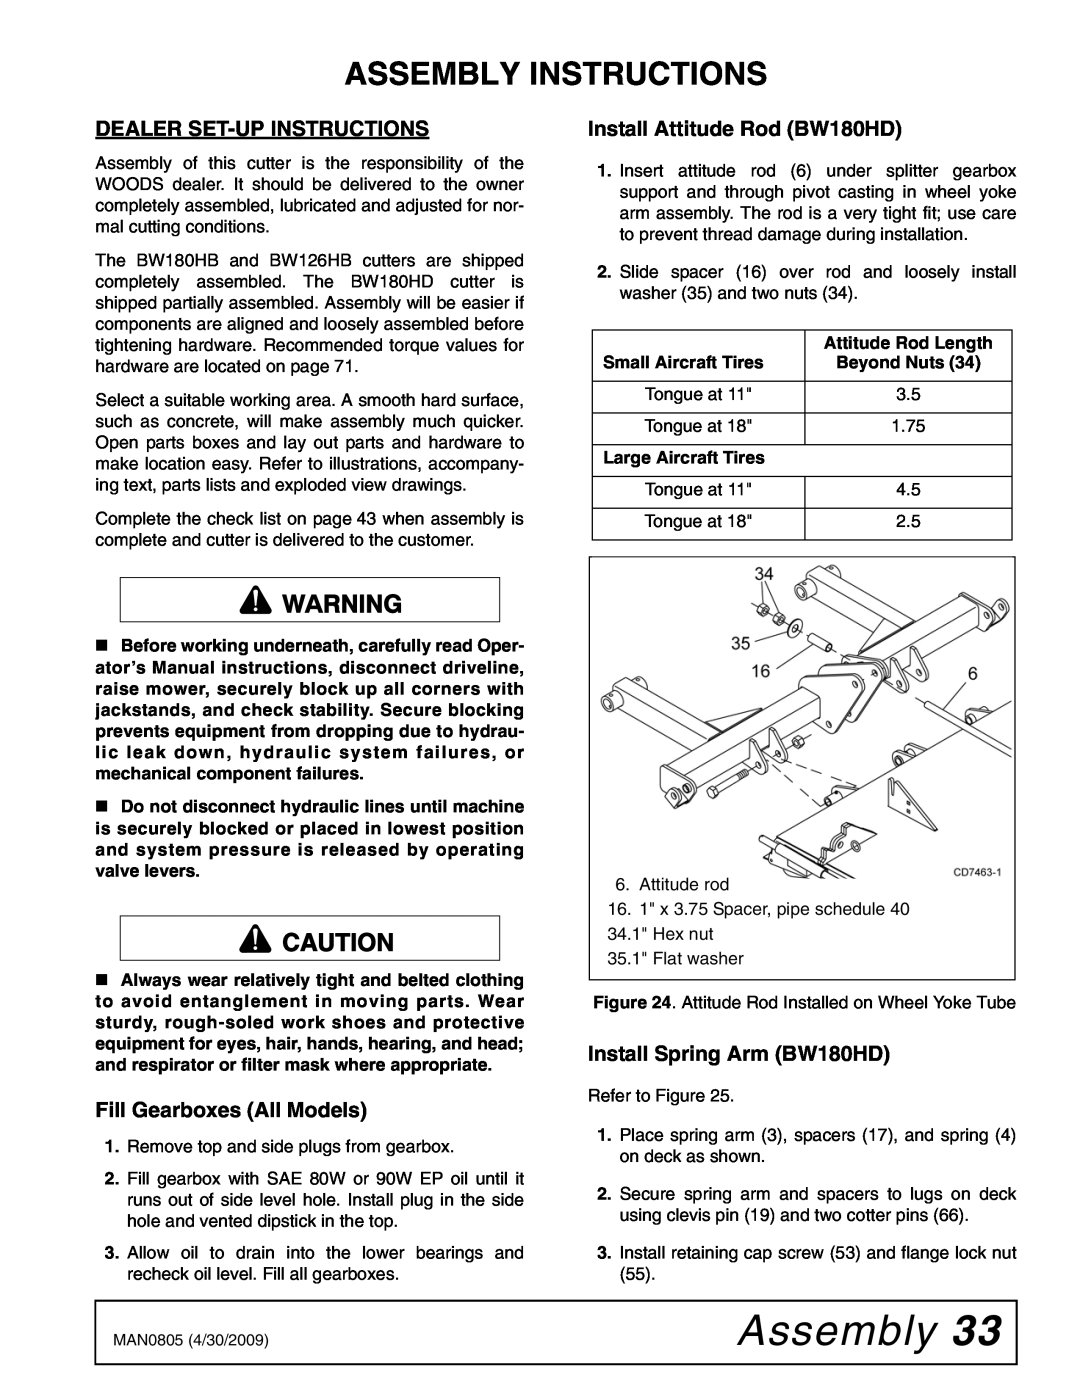 Woods Equipment BW180HBQ, BW126HB manual Assembly Instructions, Dealer Set-Up Instructions, Fill Gearboxes All Models 